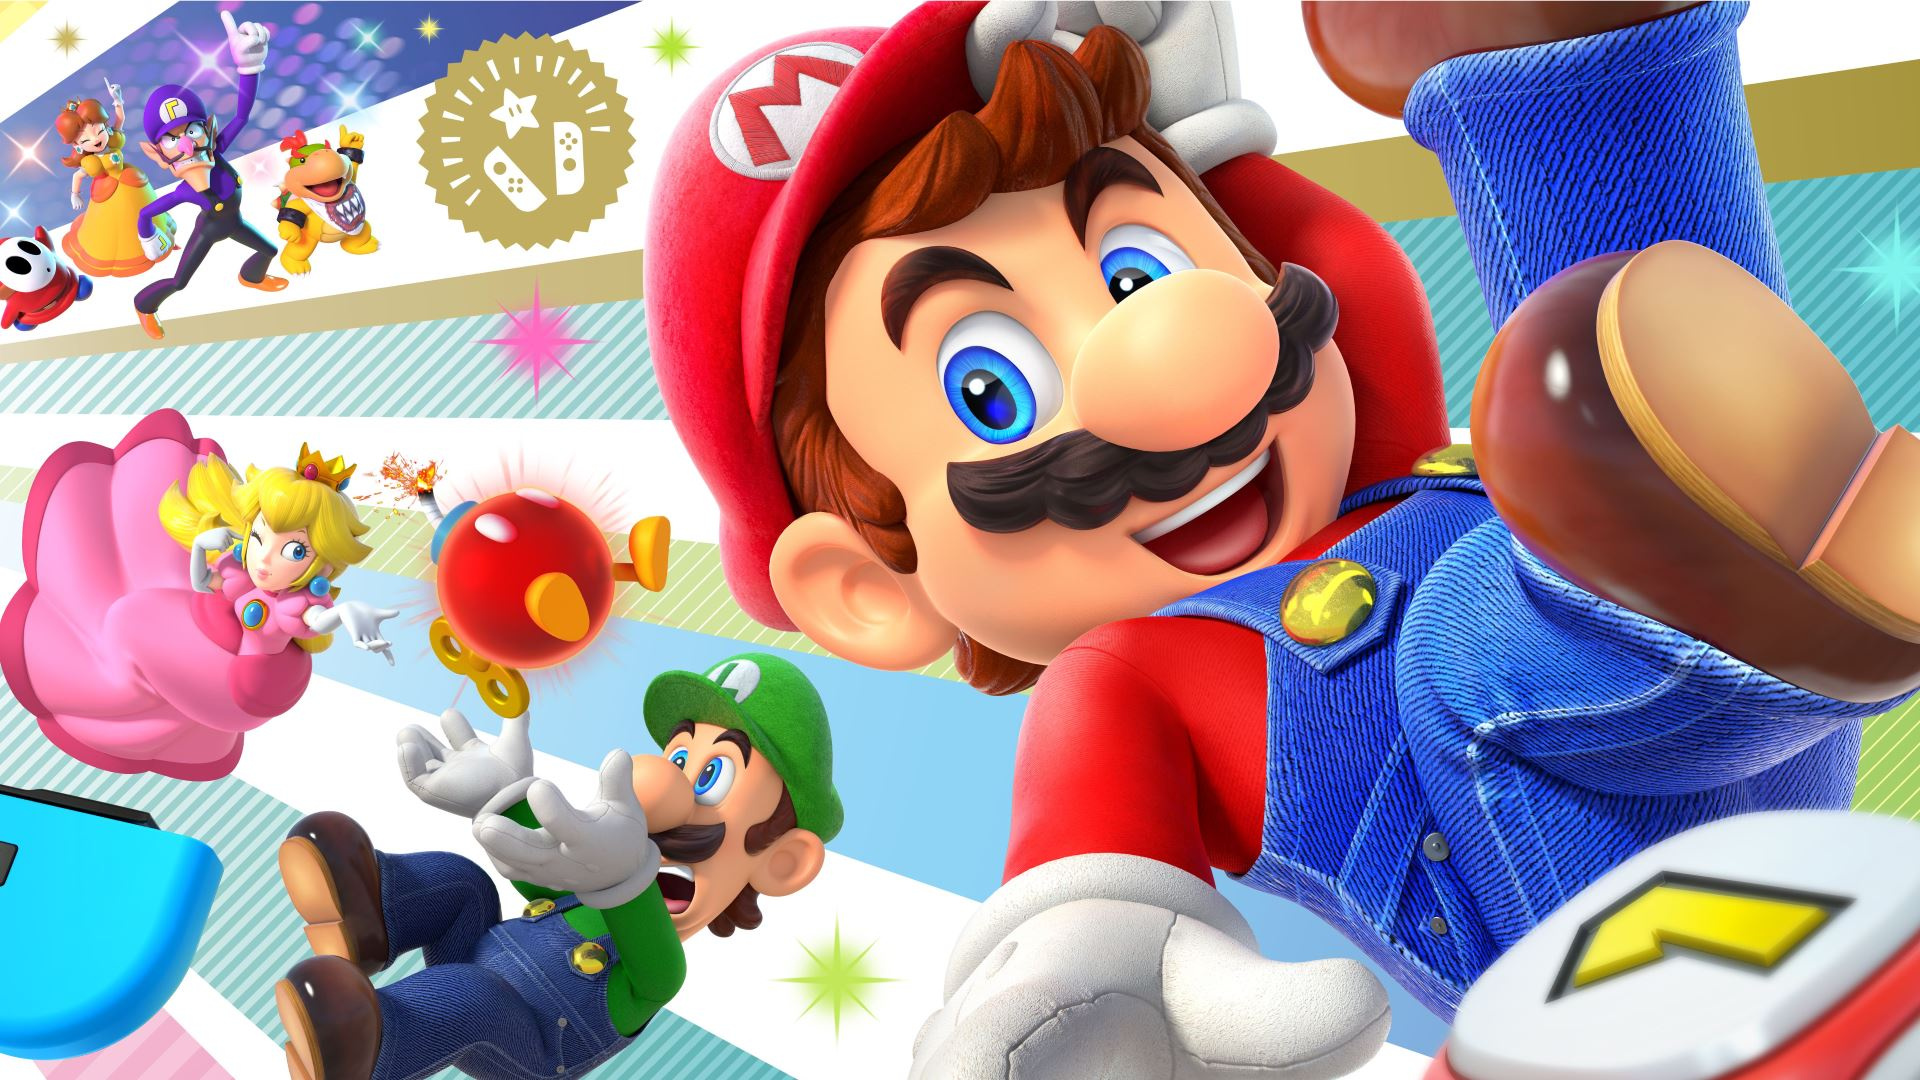 Celebrate Super Mario Party's Release With This Free My Nintendo